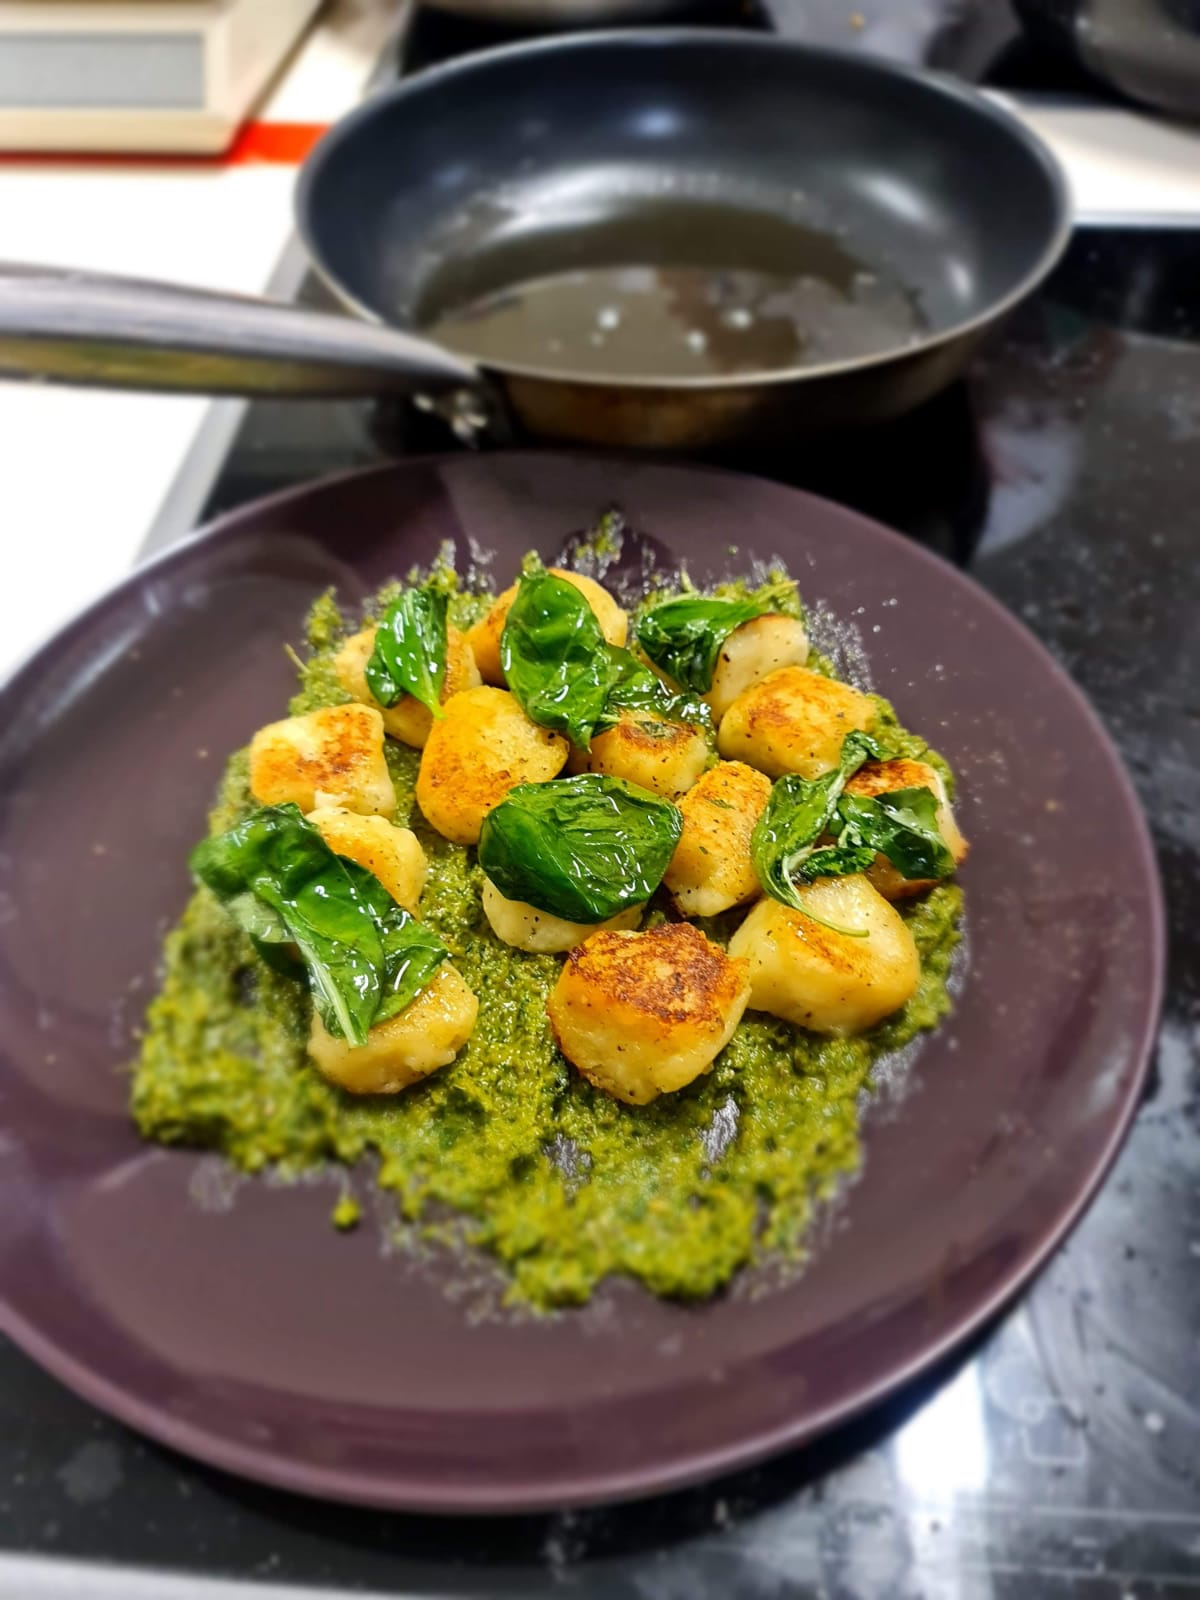 Pan-fried Gnocchi with Mixed Herb Pesto